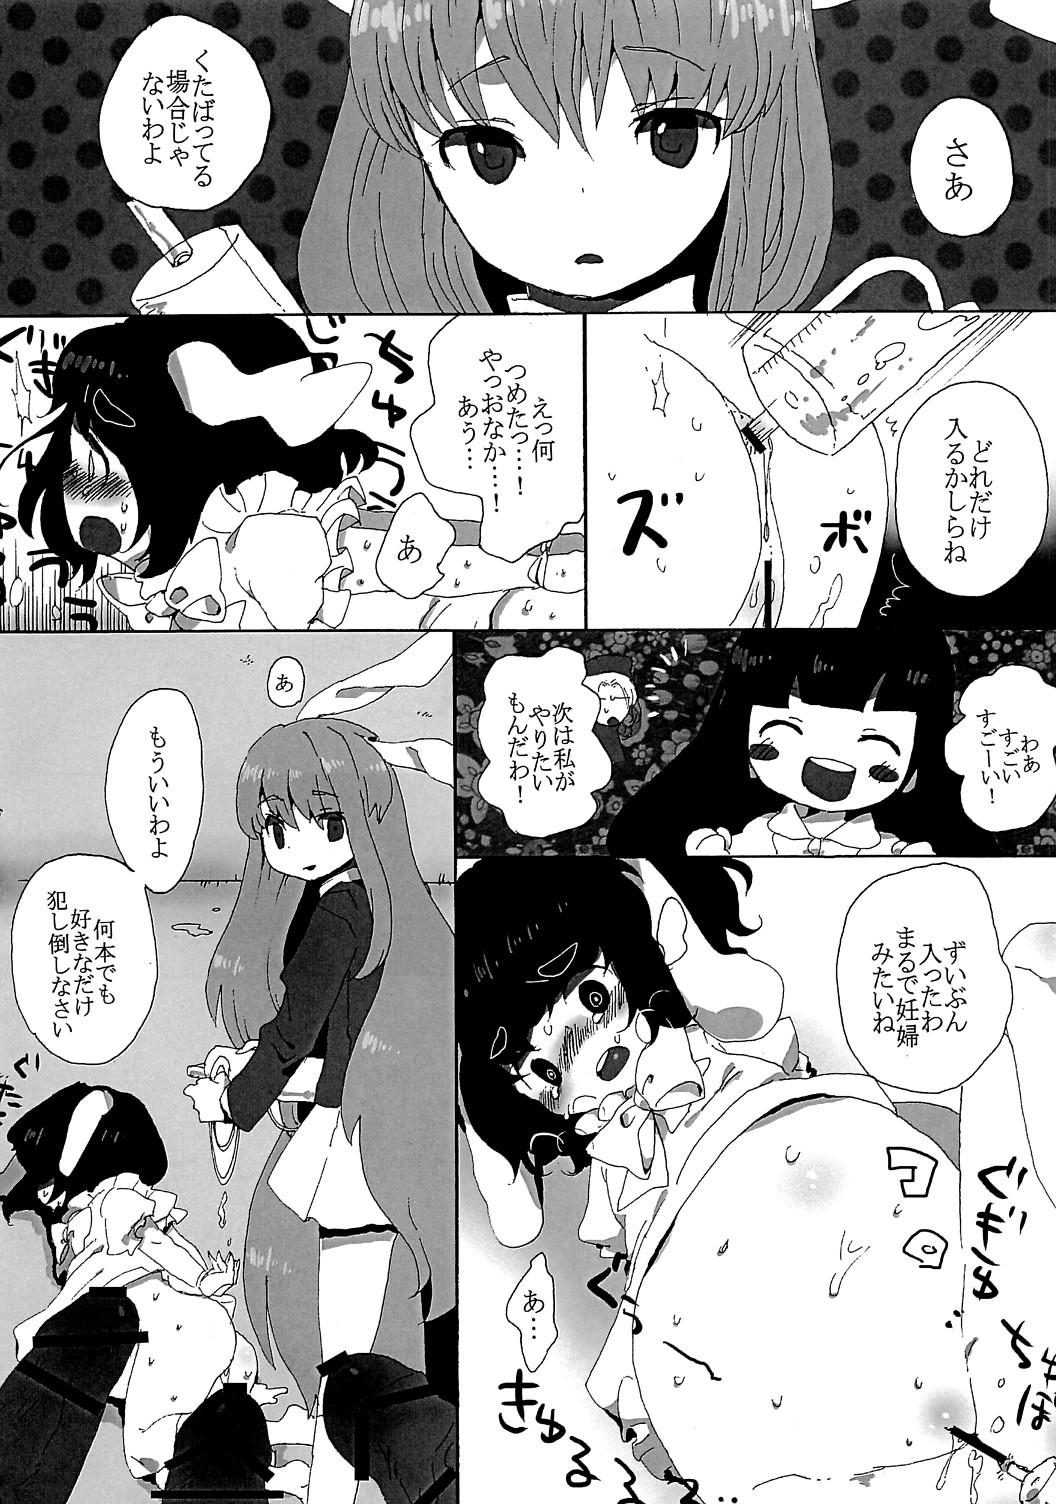 Big Dick rumor the second - Touhou project Foda - Page 8